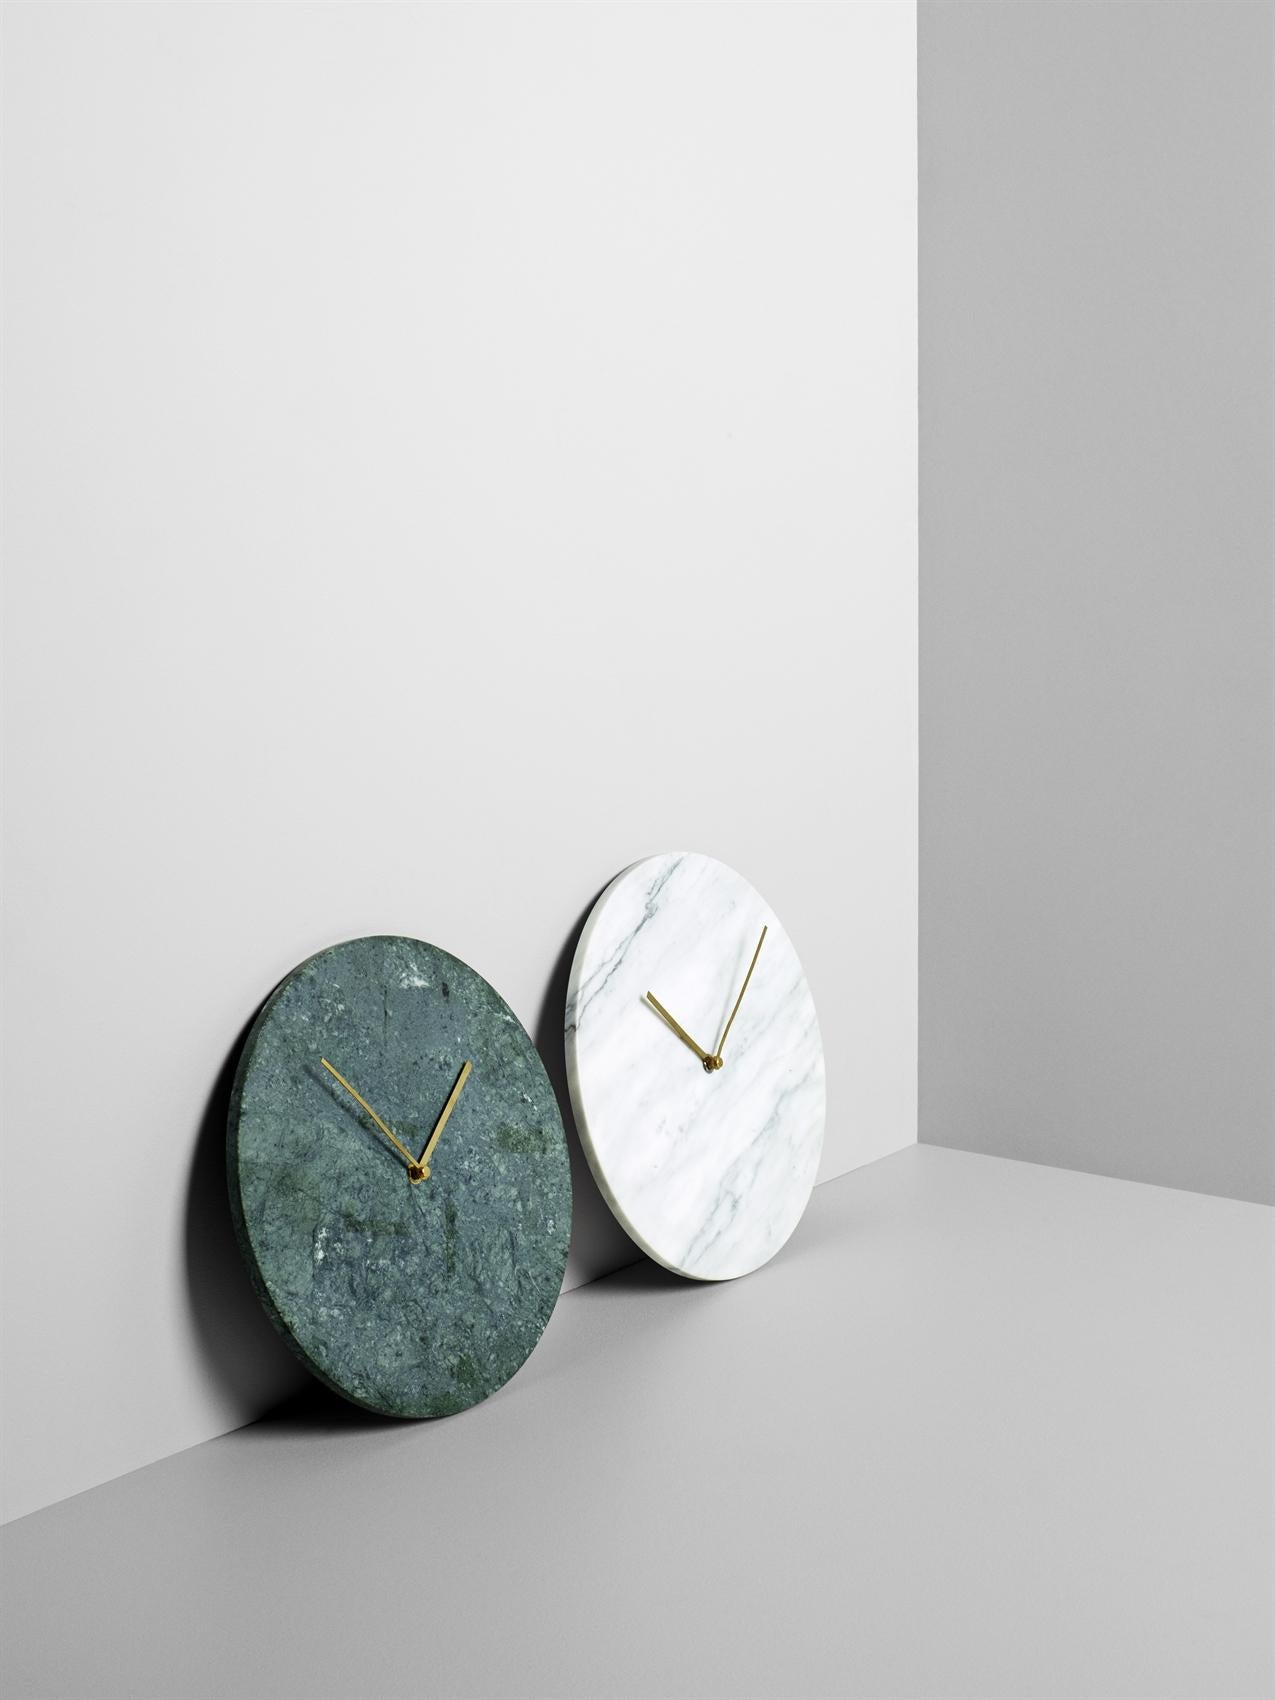 The minimalistic Norm wall clock, with its clean lines, embodies the classic simplicity of Scandinavian design. The clock, reduced to the most essential elements, is the latest in a series by Copenhagen studio Norm Architects. In the age of